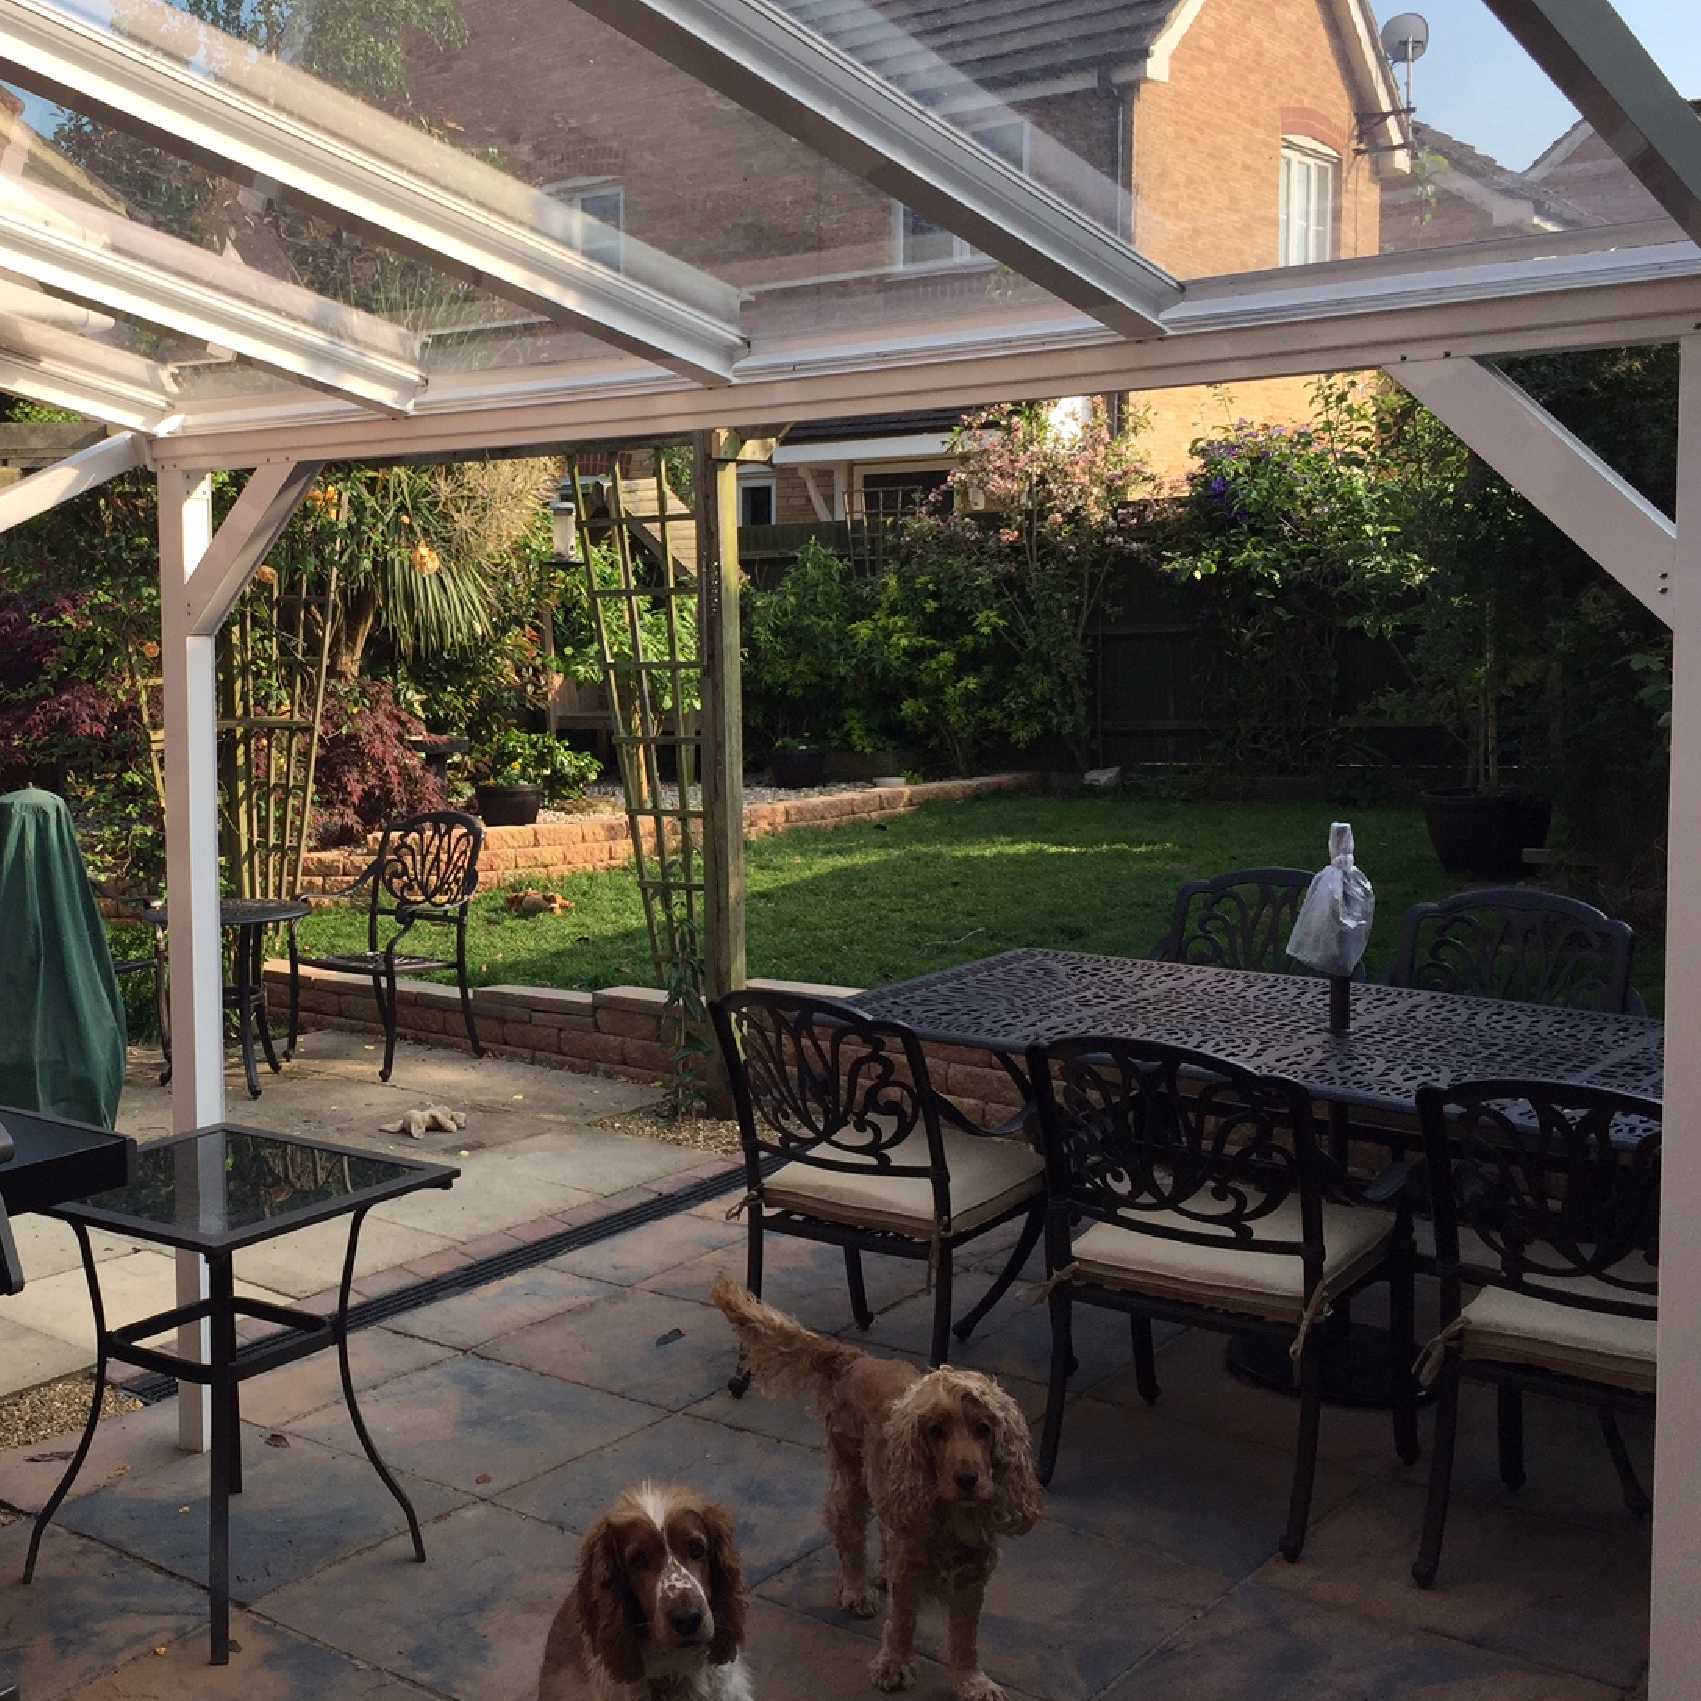 Affordable Omega Smart Lean-To Canopy, White UNGLAZED for 6mm Glazing - 2.8m (W) x 1.5m (P), (2) Supporting Posts